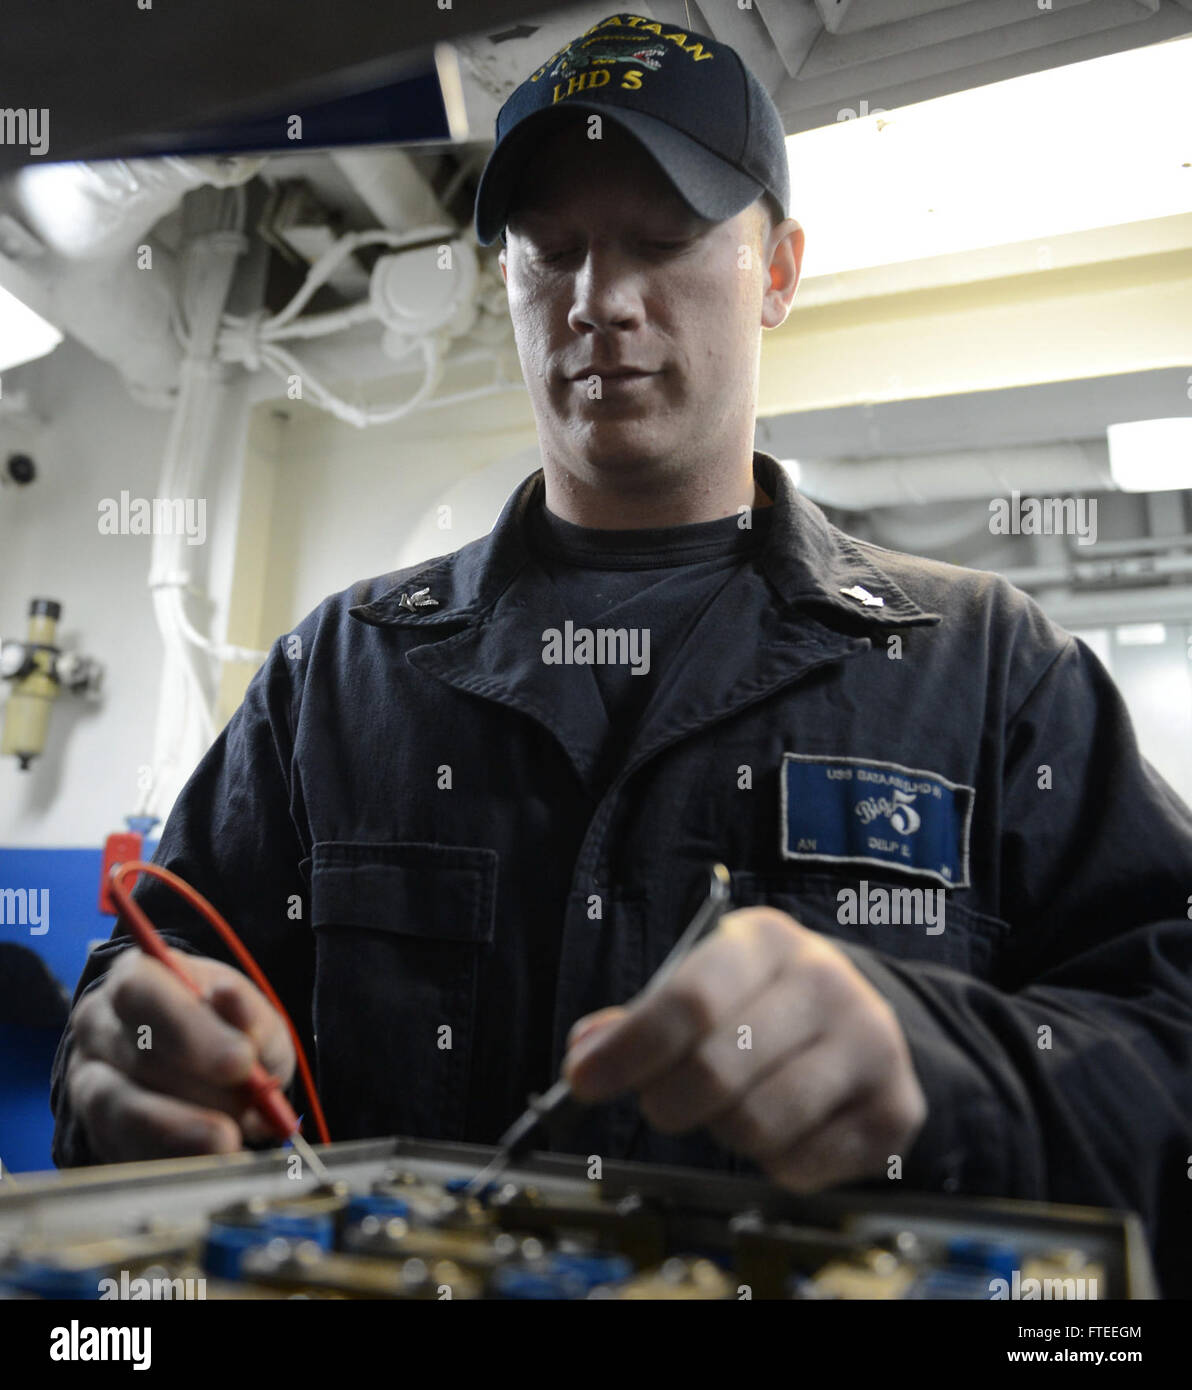 140528-N-MW280-094: MEDITERRANEAN SEA (May 28, 2014) - Aviation Electrician's Mate 3rd Class Erick Delp tests cell voltage in an aviation battery for an MV-22 Osprey aboard the multipurpose amphibious assault ship USS Bataan (LHD 5). Bataan, with elements of the 22nd Marine Expeditionary Unit, is operating in the in U.S. 6th Fleet area of operations to augment U.S. Crisis Response forces in the region. (U.S. Navy photo by Mass Communication Specialist 3rd Class Chase Hawley/Released) Join the conversation on Twitter ( https://twitter.com/naveur navaf )  follow us on Facebook ( https://www.face Stock Photo